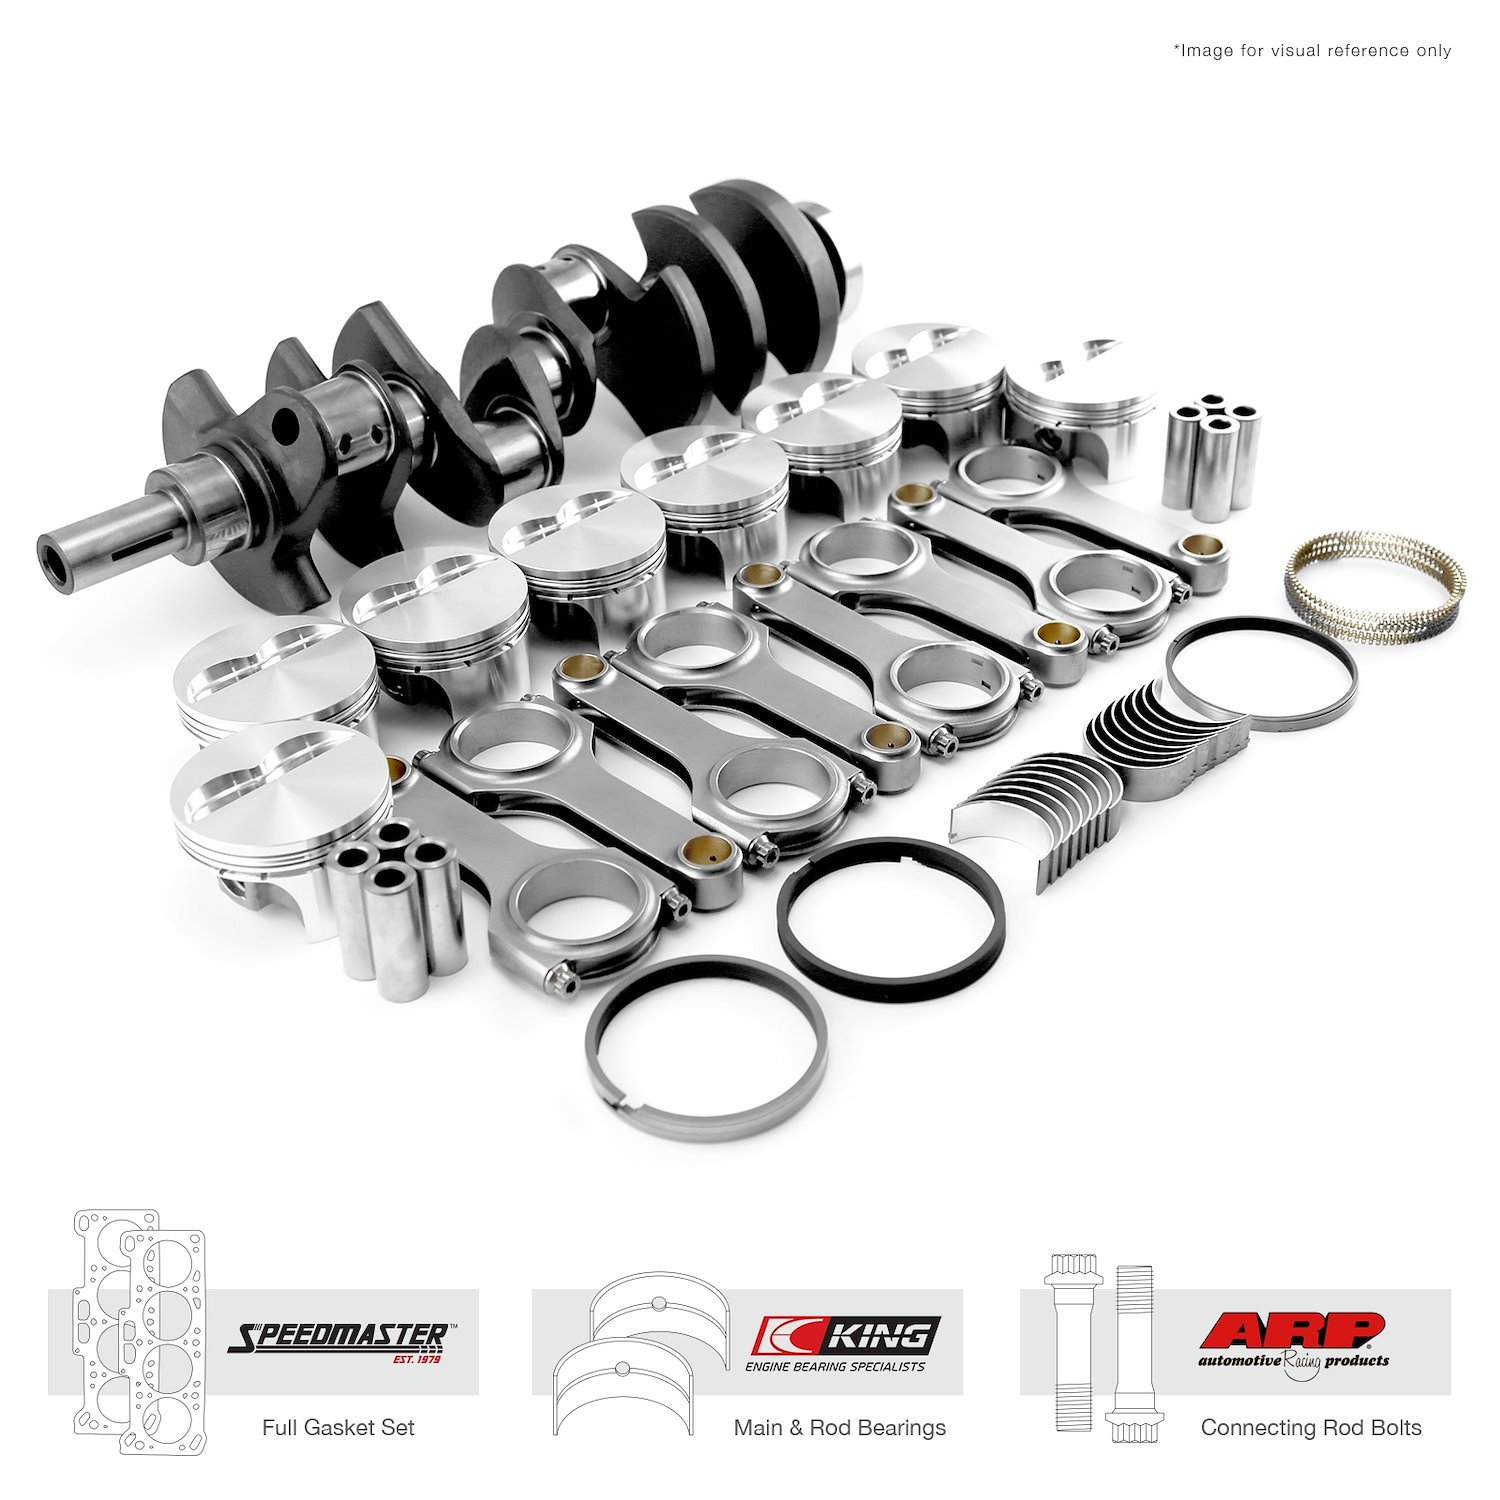 1-290-007 Ford SB 289 302 Windsor 3.400 in. 347 ci Rotating Assembly Kit - Outlaw Series